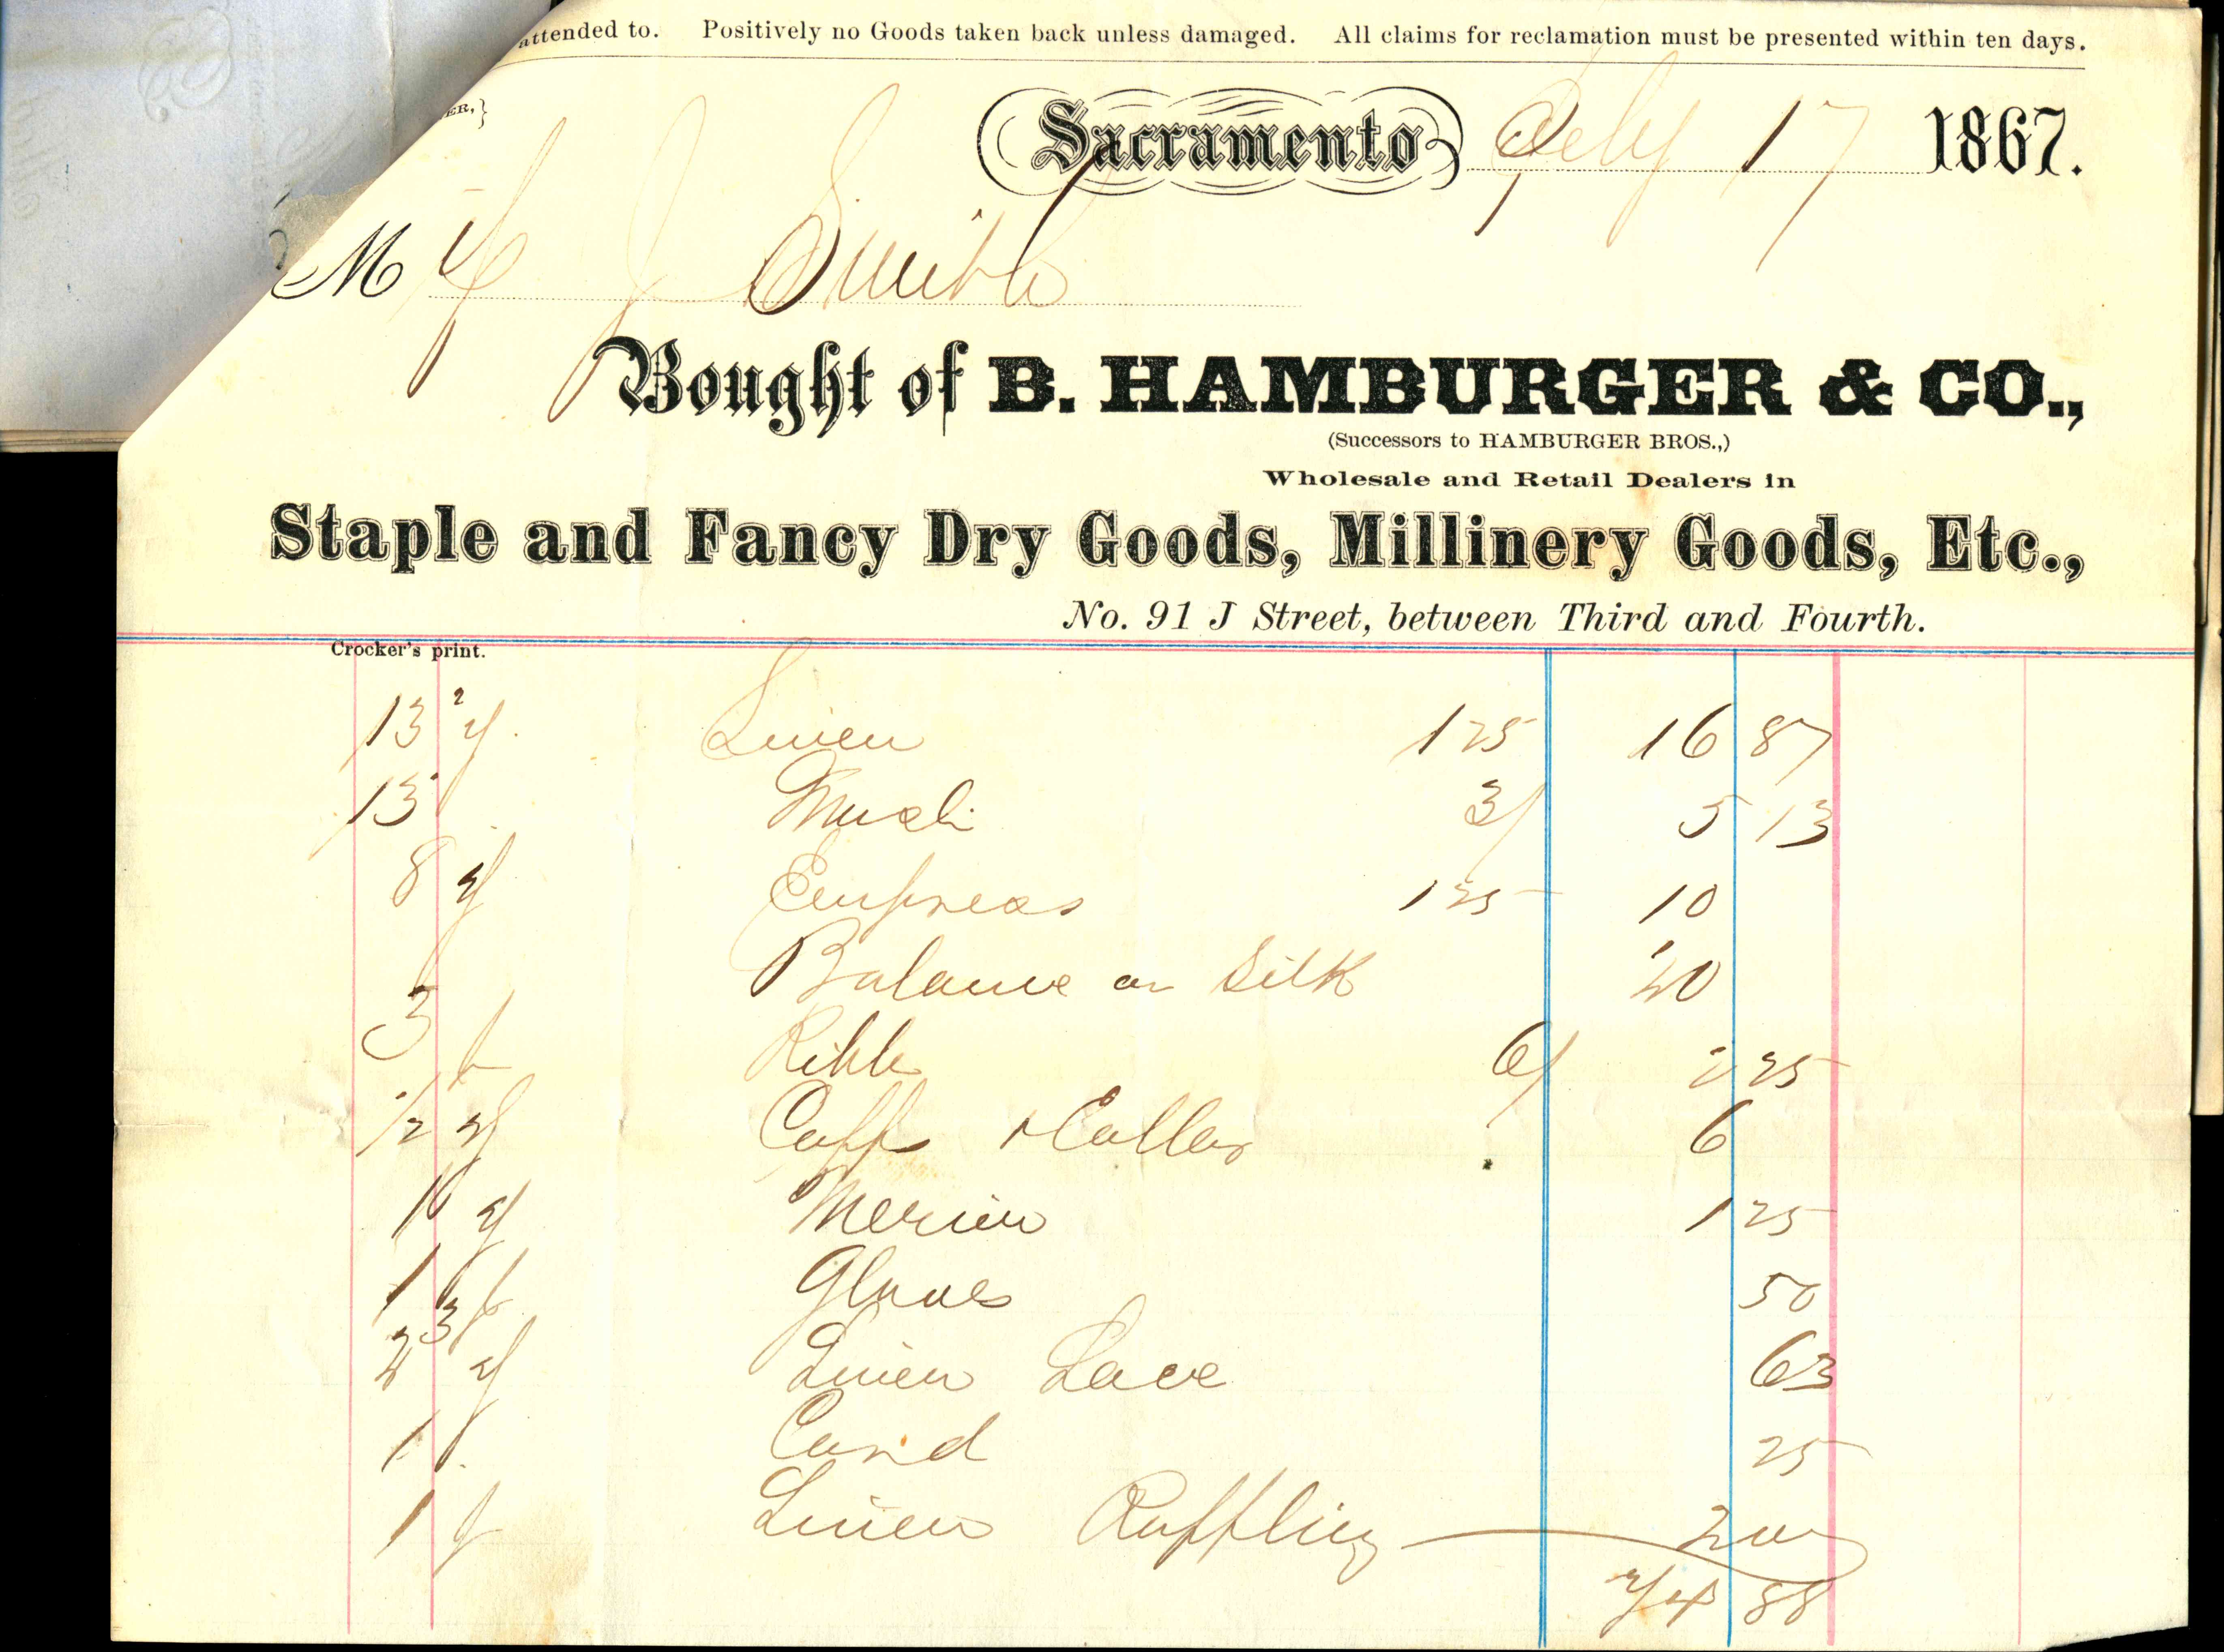 :Staple and Fancy Dry Goods [...]